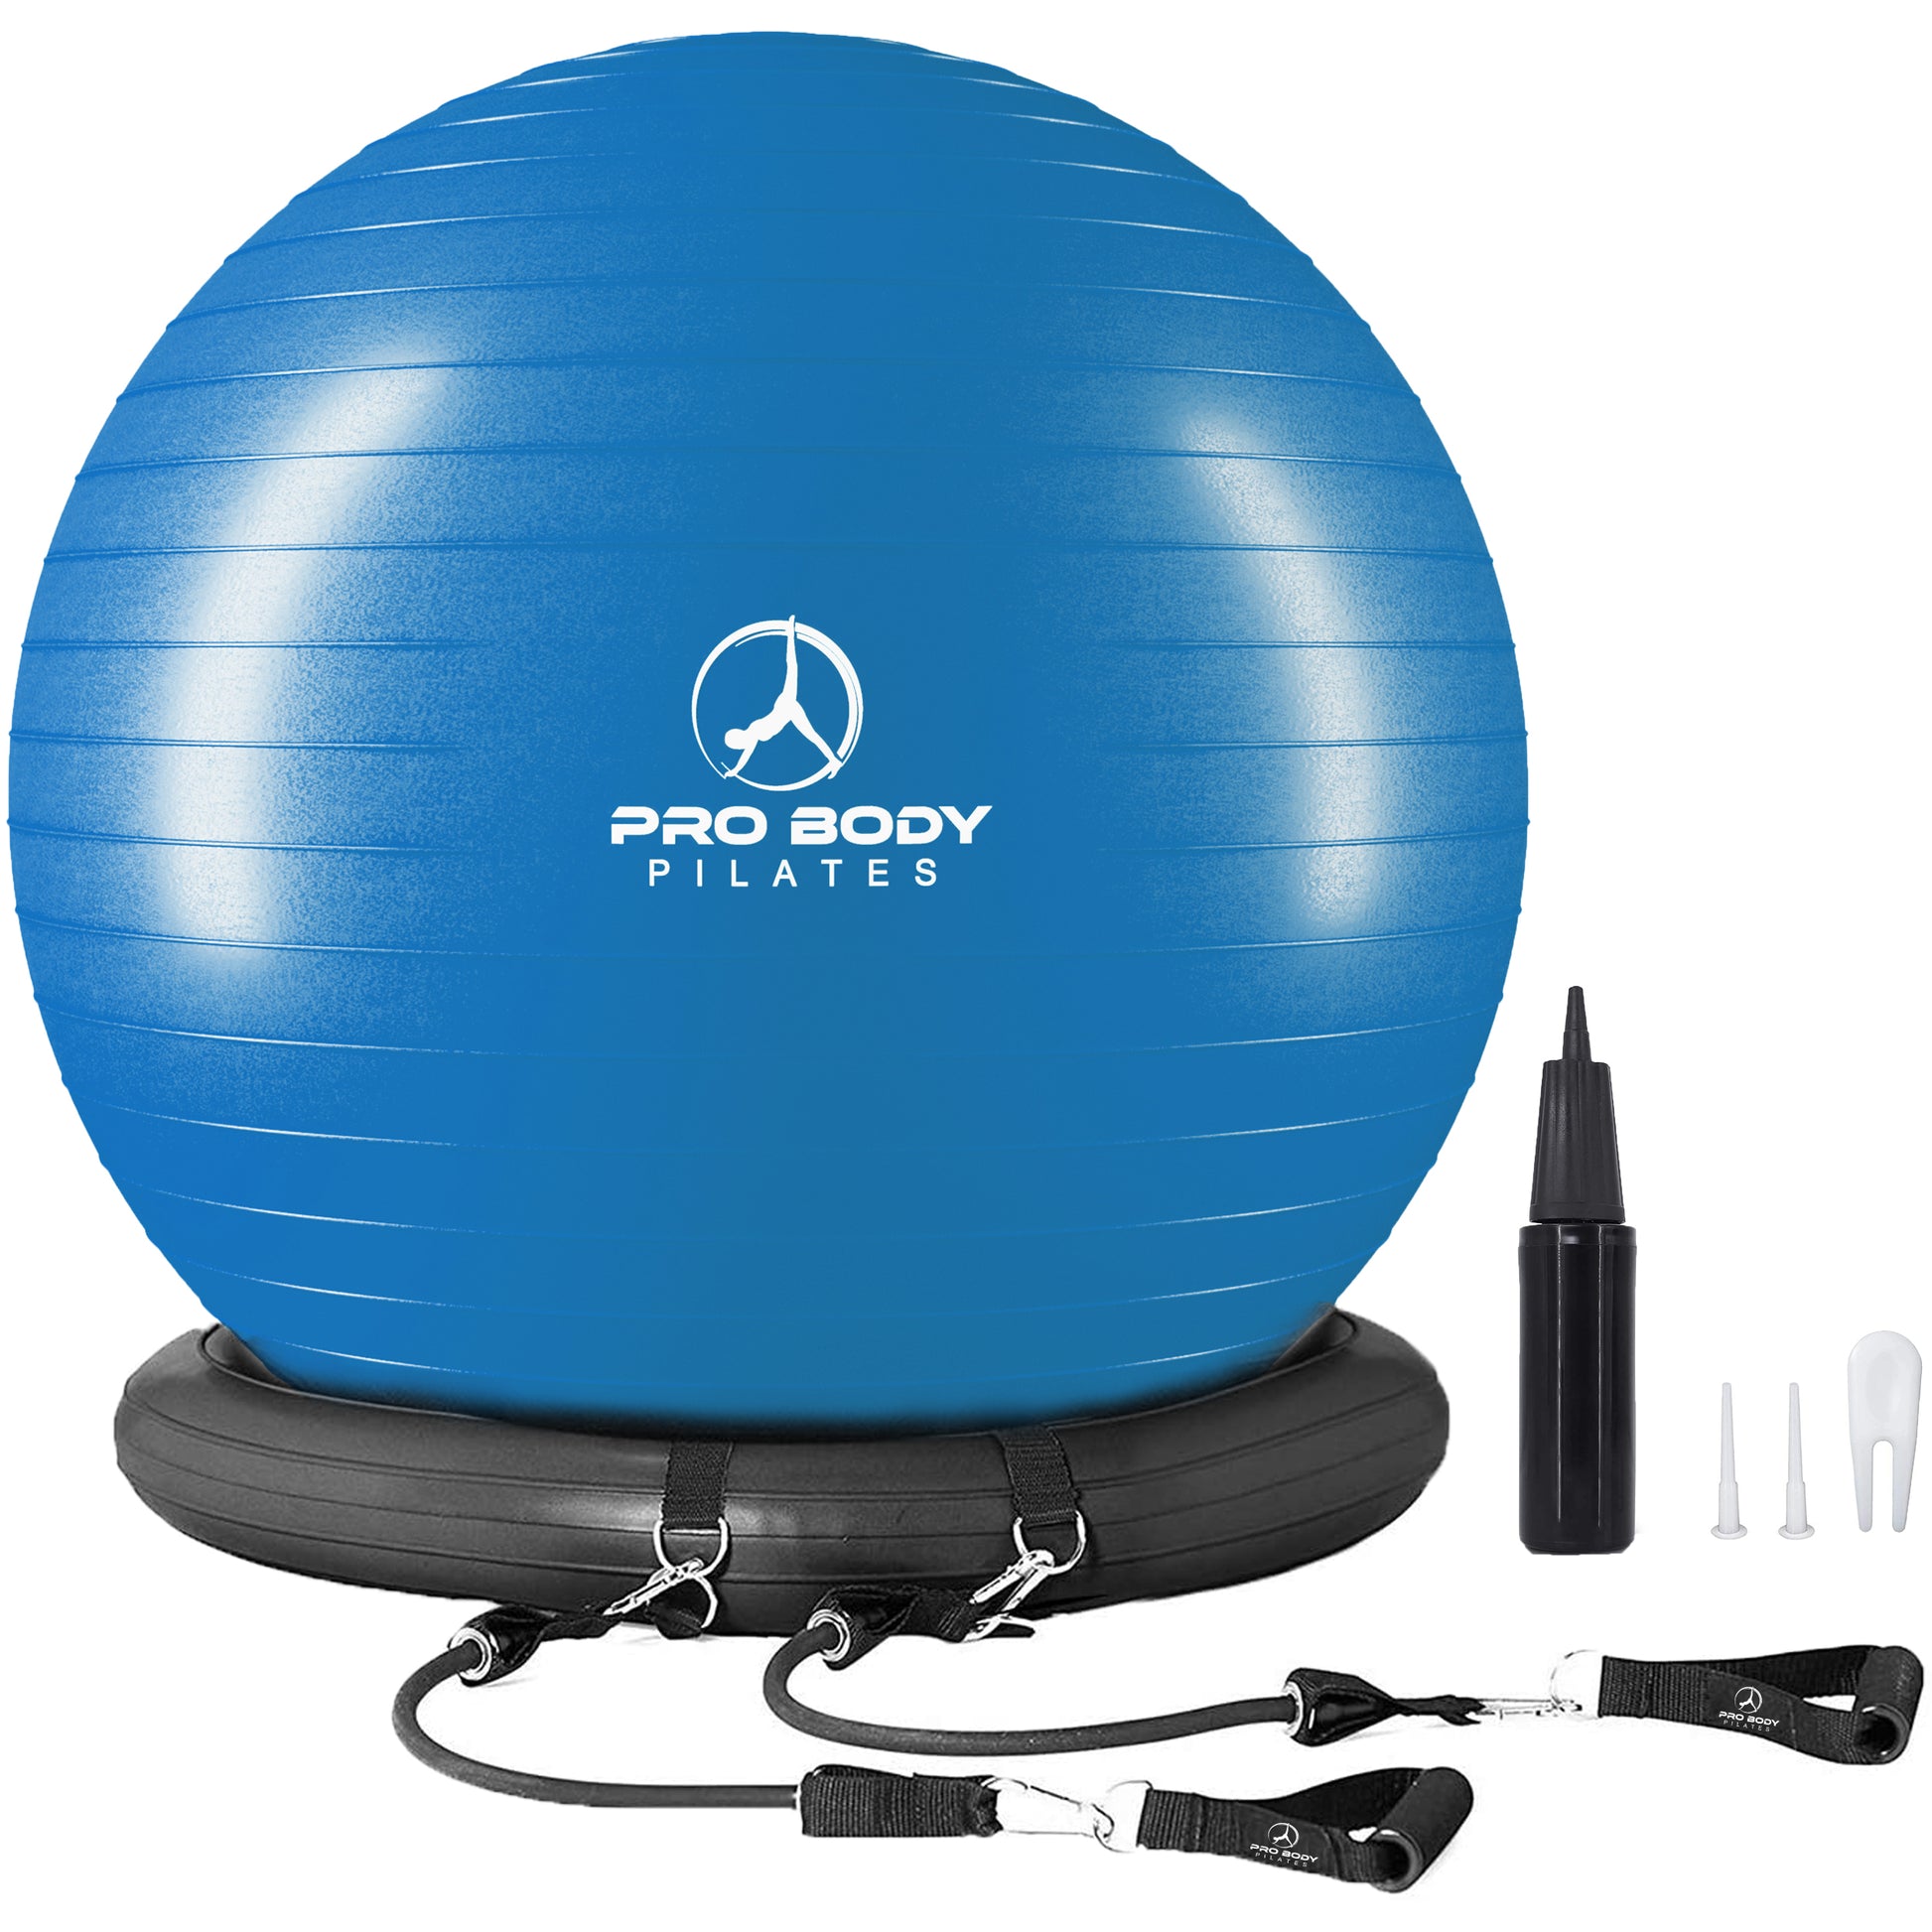  Goplus Yoga Ball Chair, 25.5 Inch Exercise Ball with